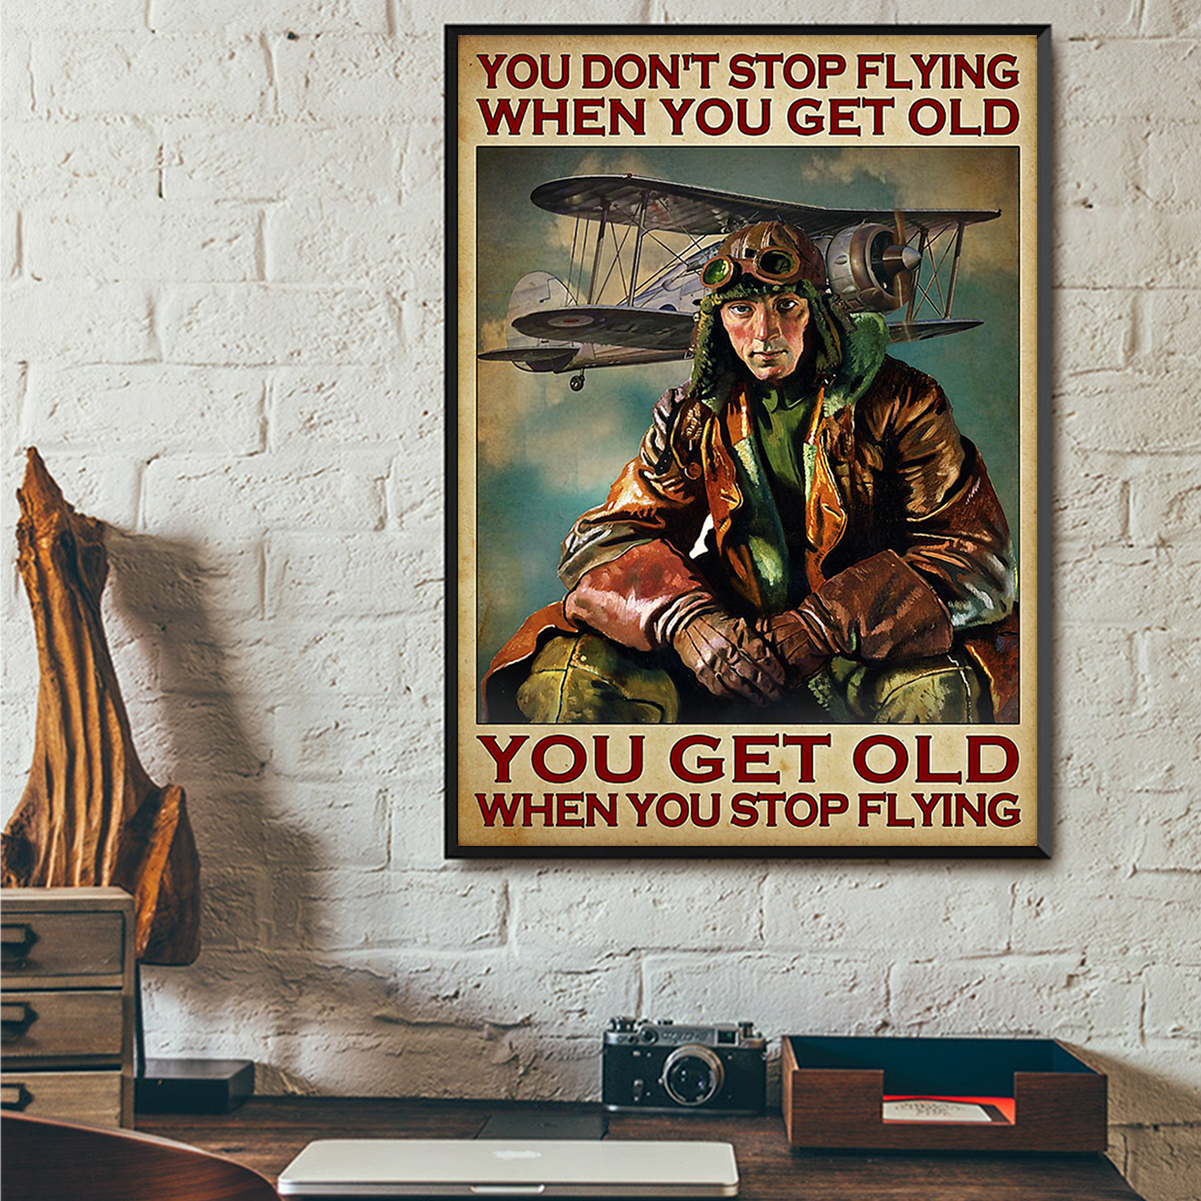 Pilot you don't stop flying when you get old poster A3